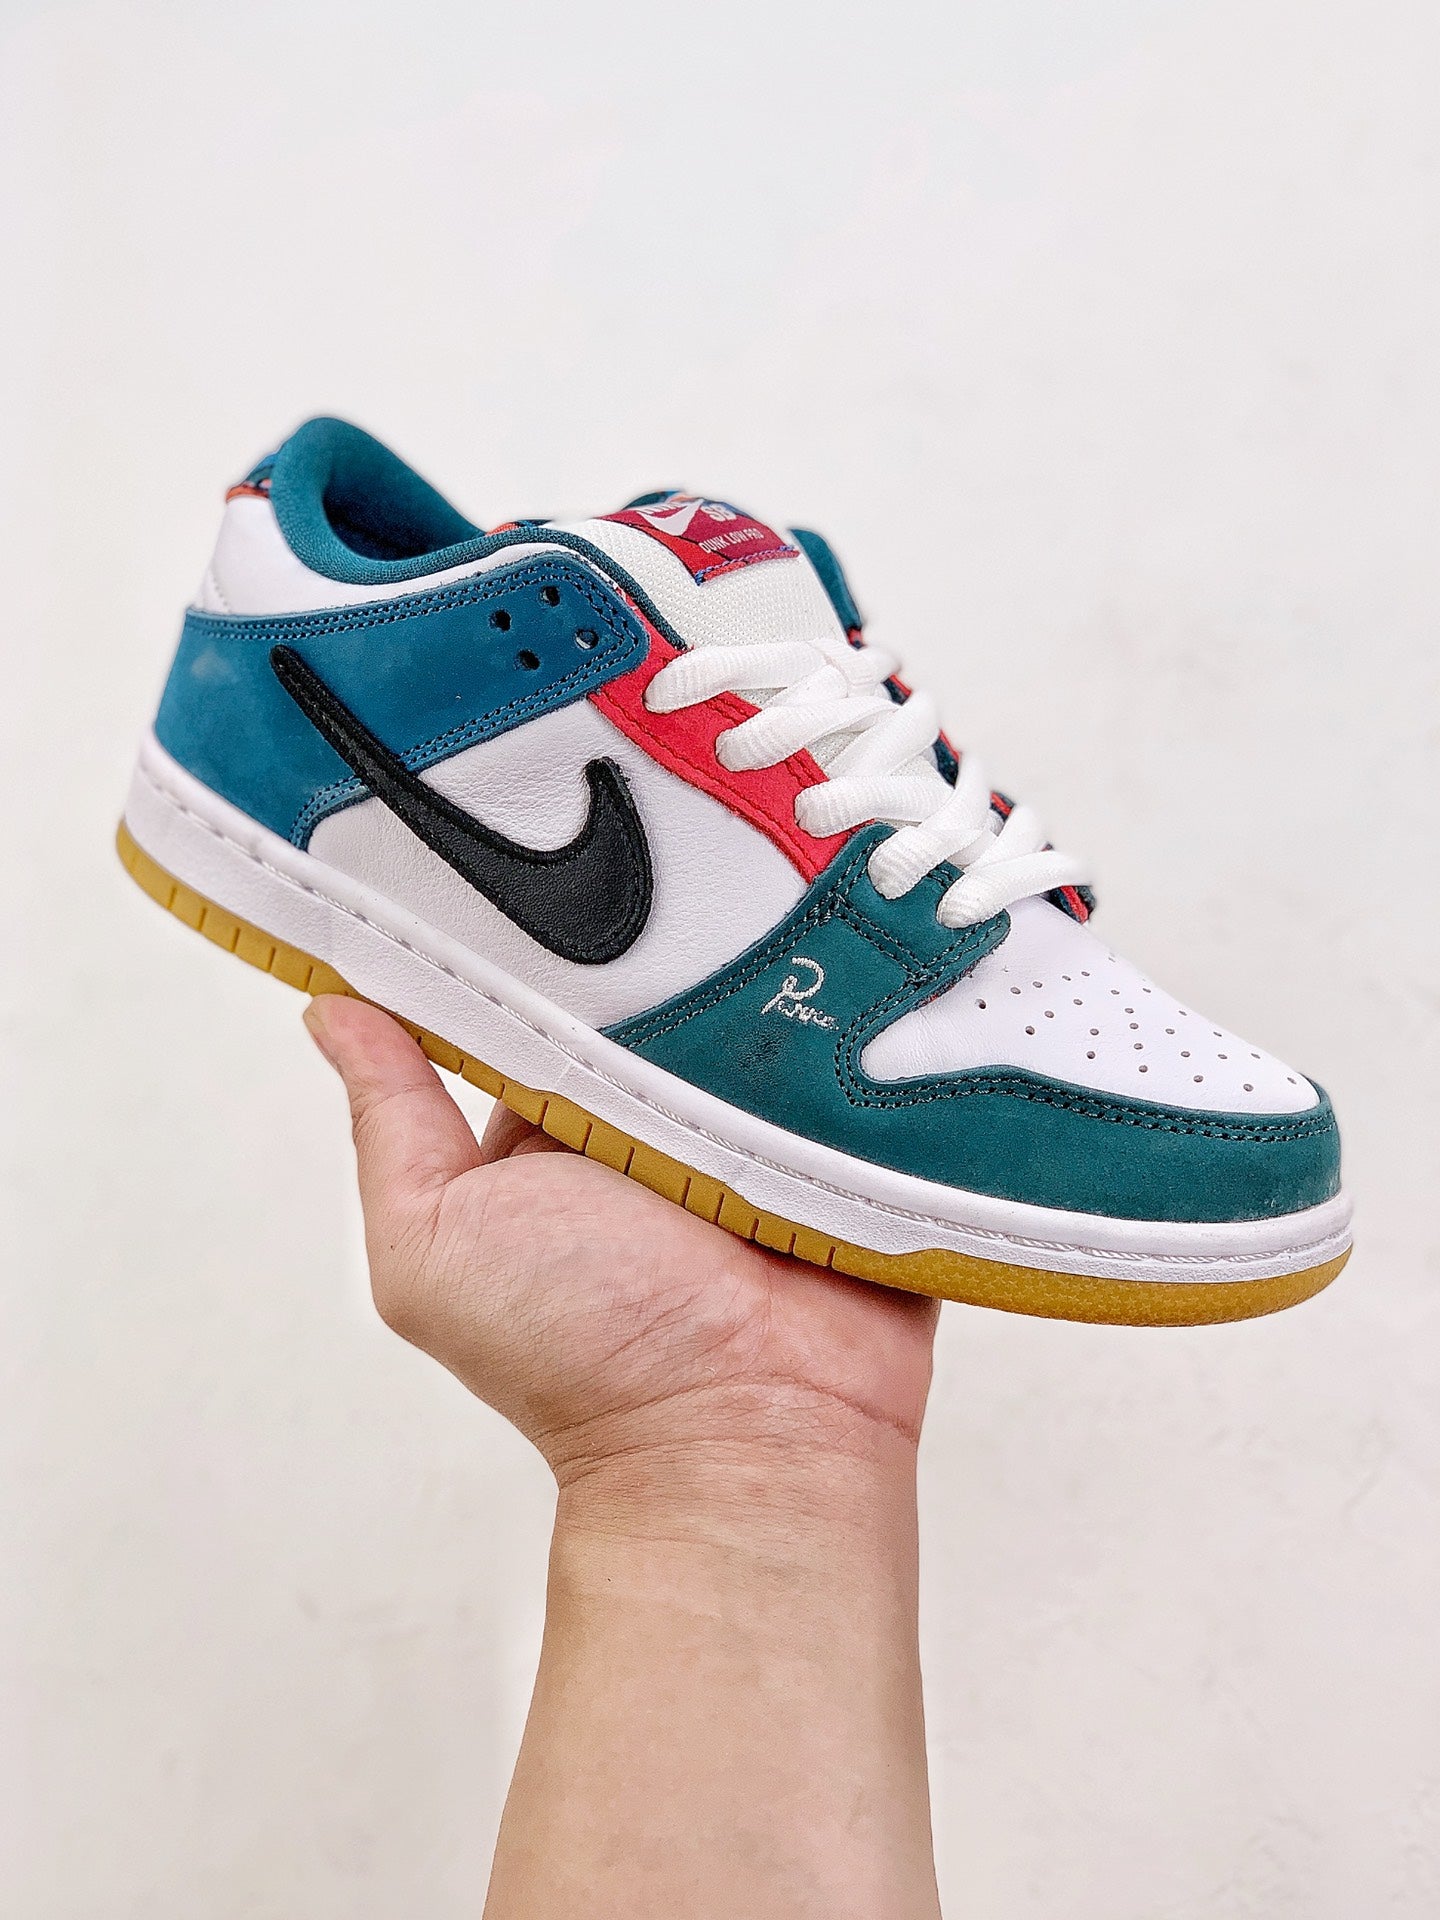 Nike SB Dunk Low "Blue green red "